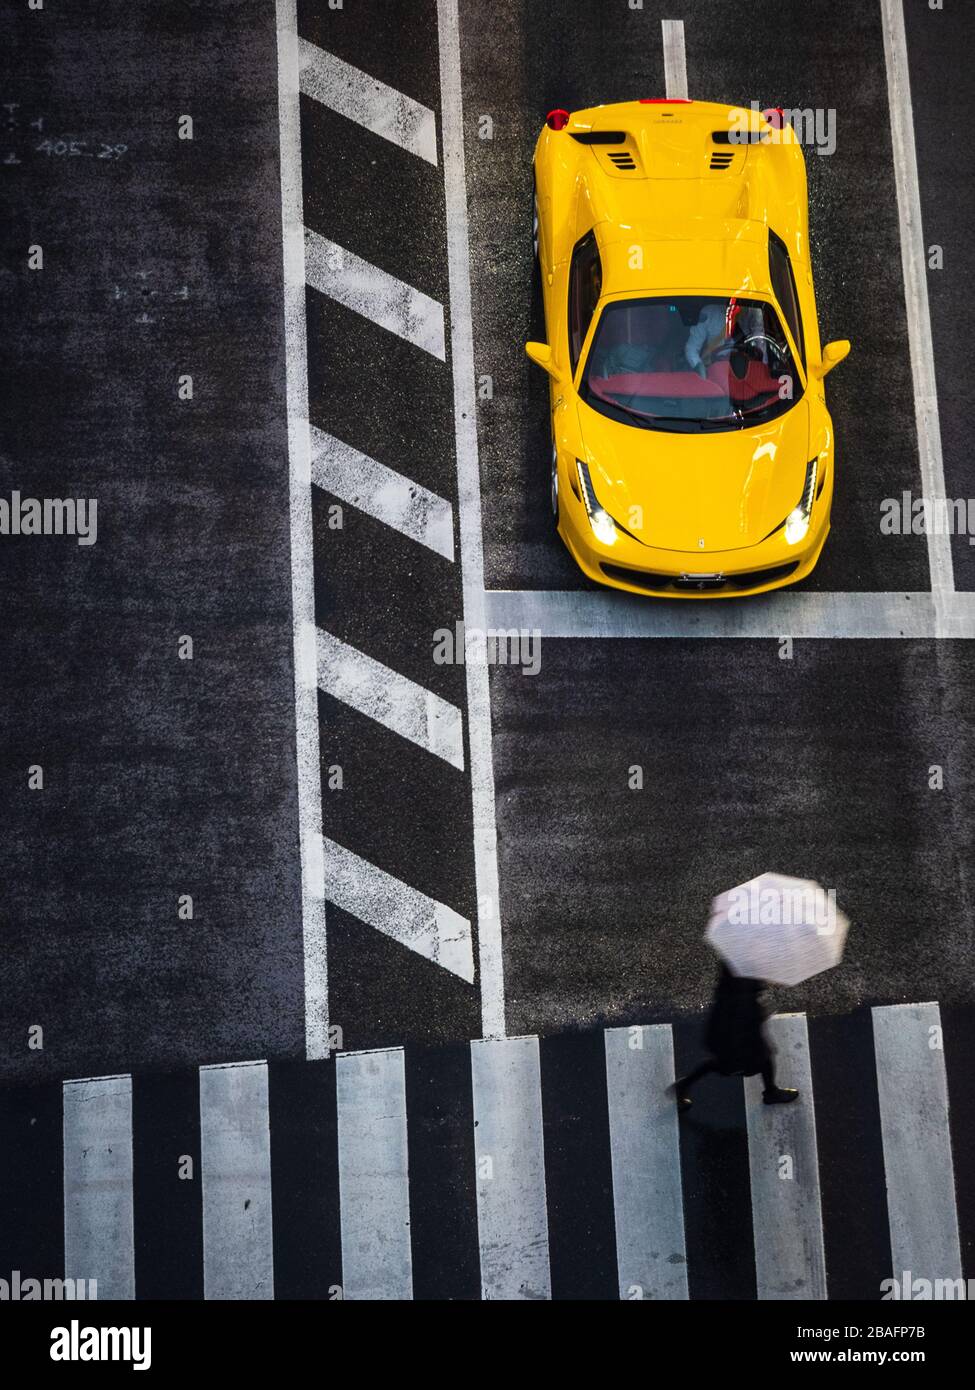 Tokyo Crossing in the Rain. View from above as a pedestrian with umbrella crosses in front of a waiting Ferrari. Stock Photo